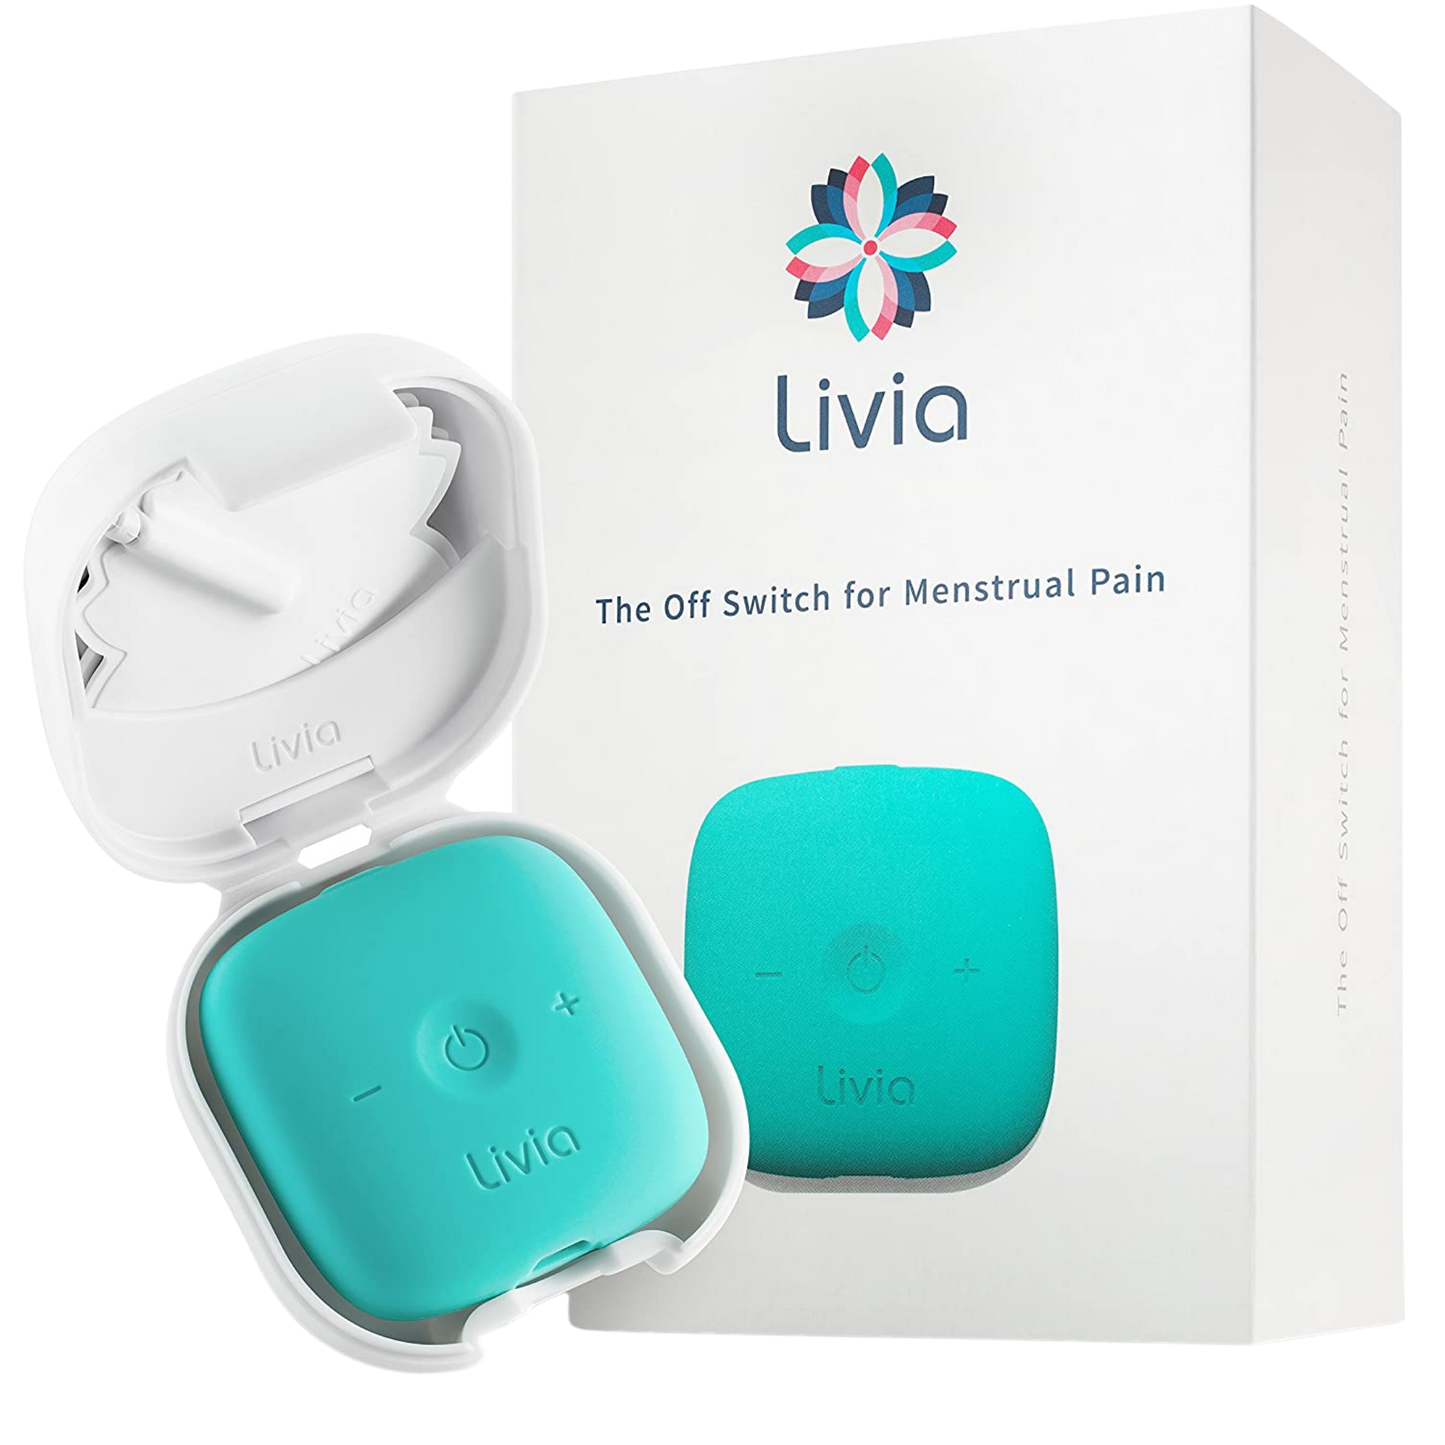 Livia, The Off Switch for Menstrual Pain